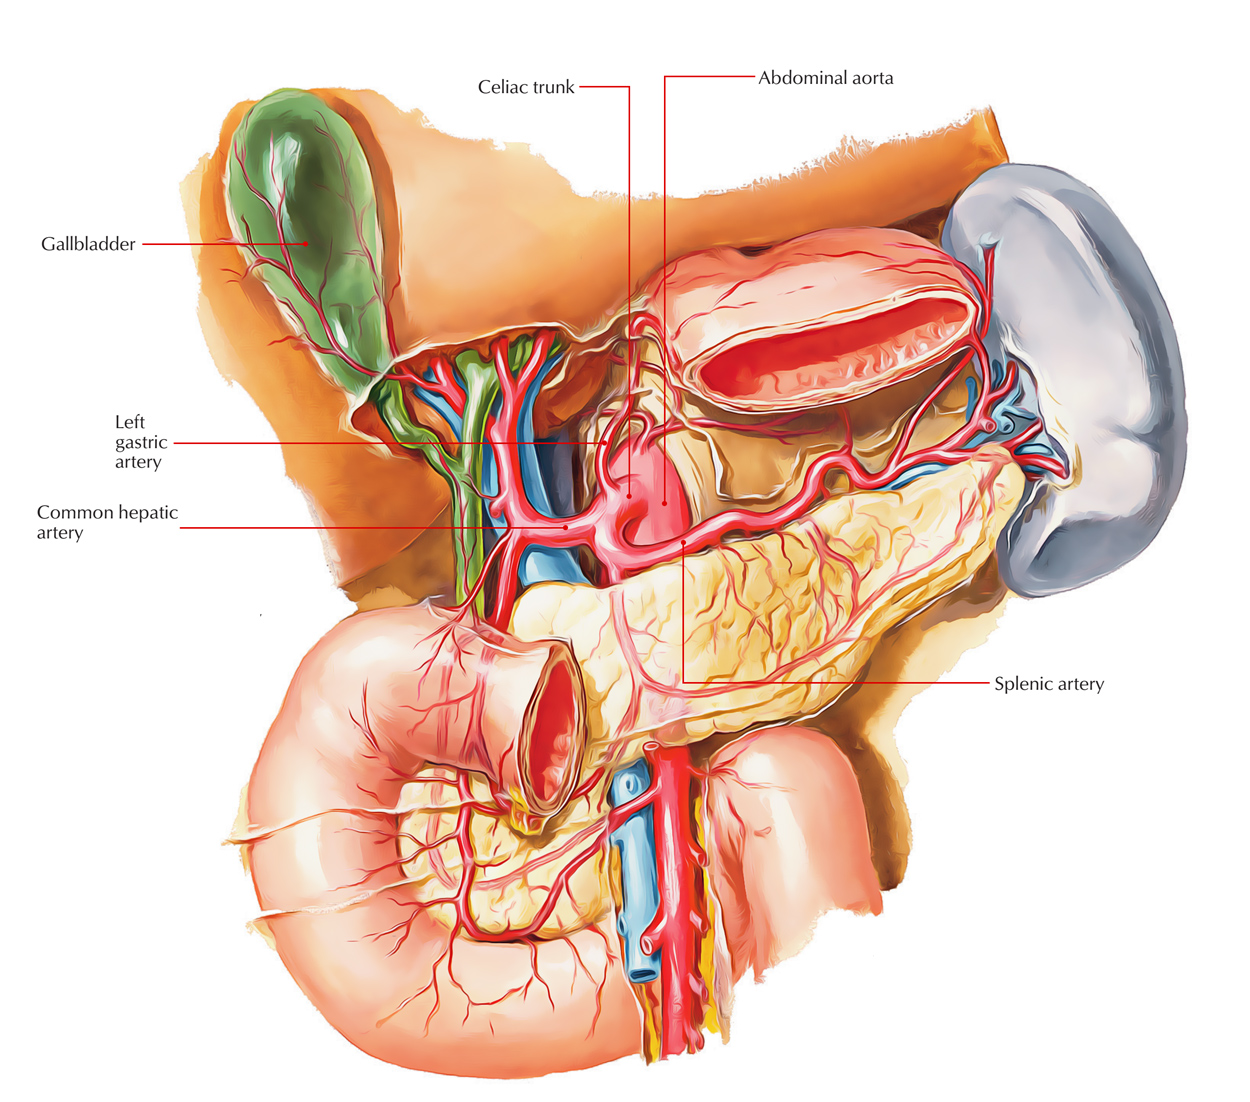 Easy Notes On Celiac Trunk Artery Learn In Just 3 Minutes